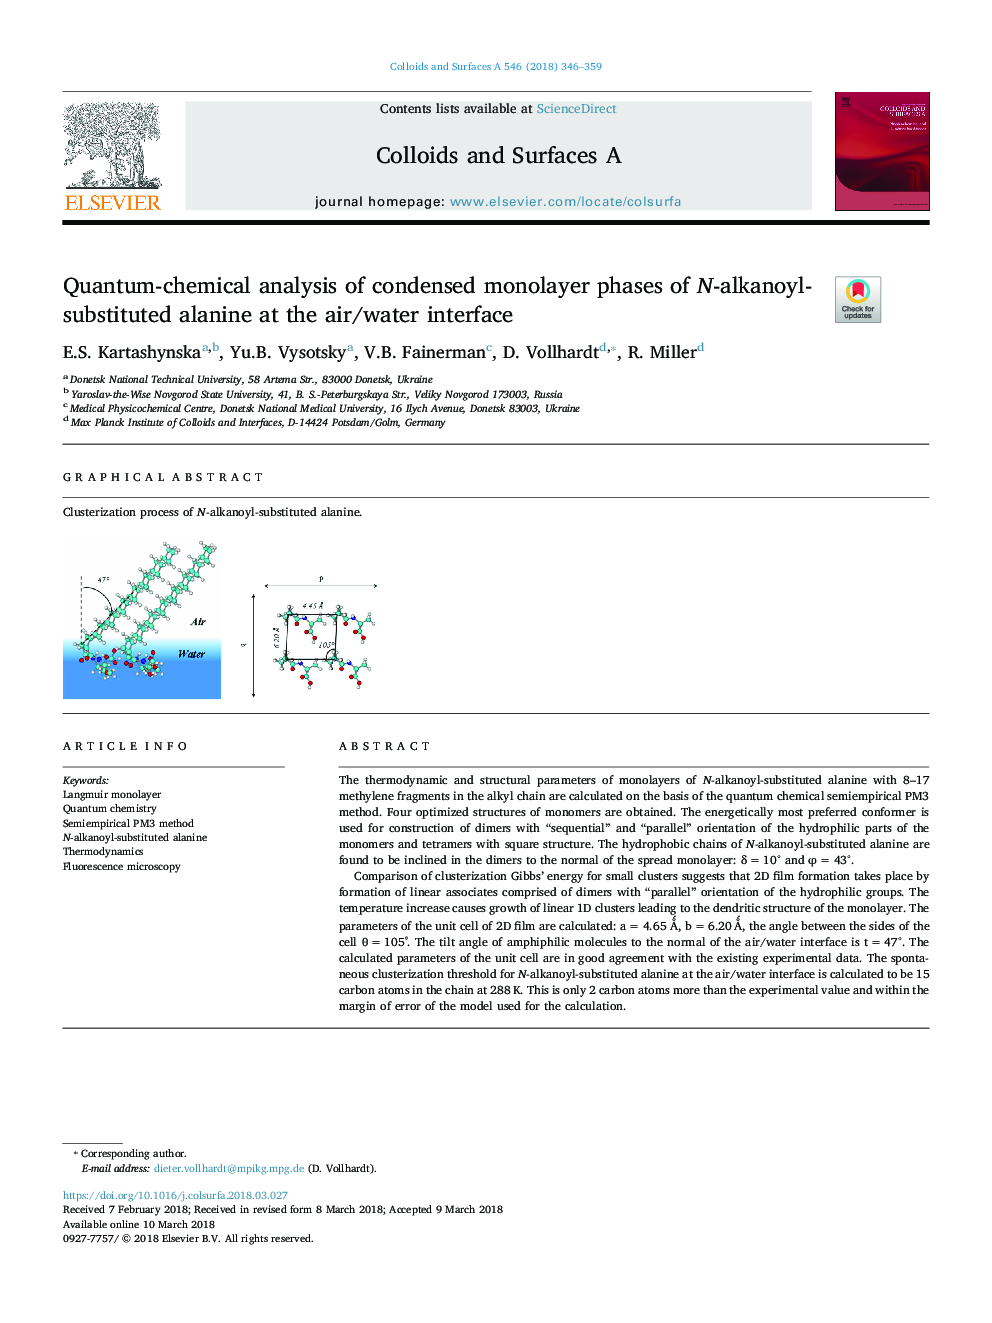 Quantum-chemical analysis of condensed monolayer phases of N-alkanoyl-substituted alanine at the air/water interface